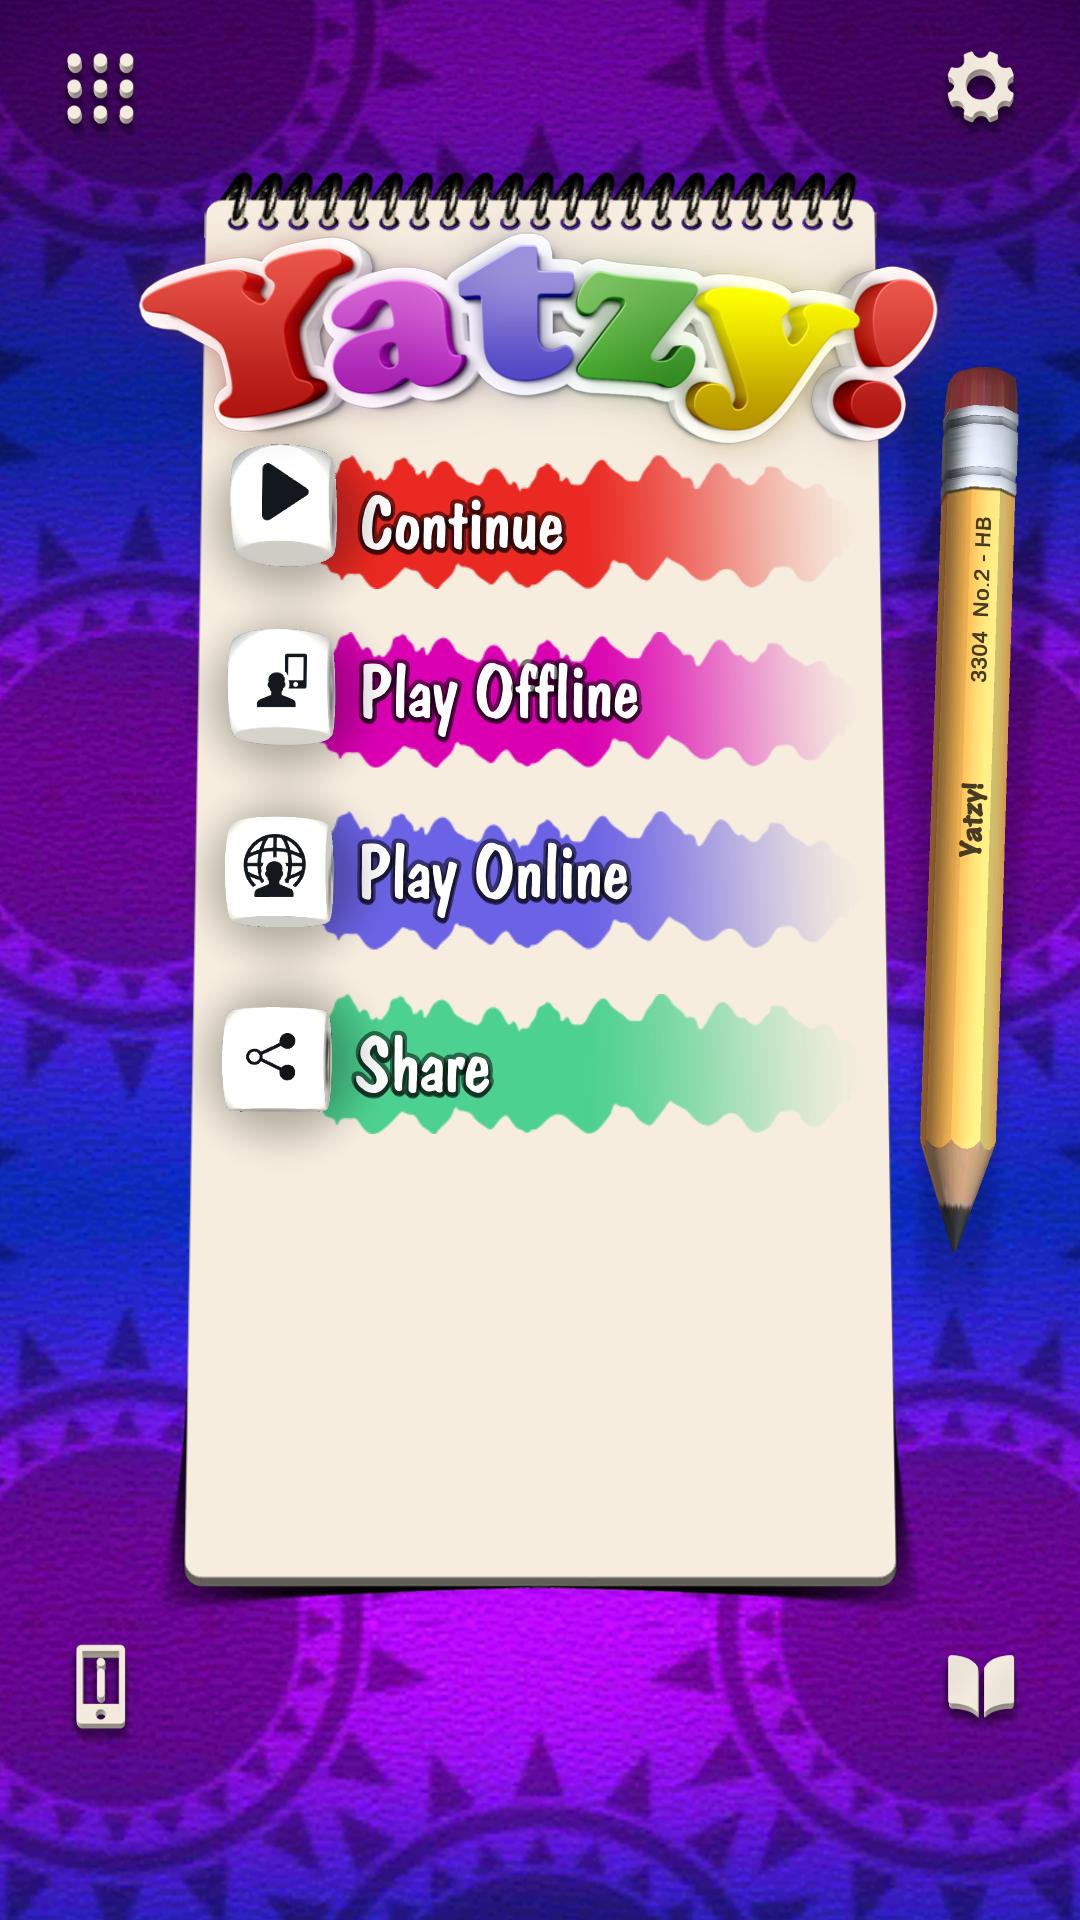 Yatzy Offline and Online - free dice game 3.3.4 Screenshot 1